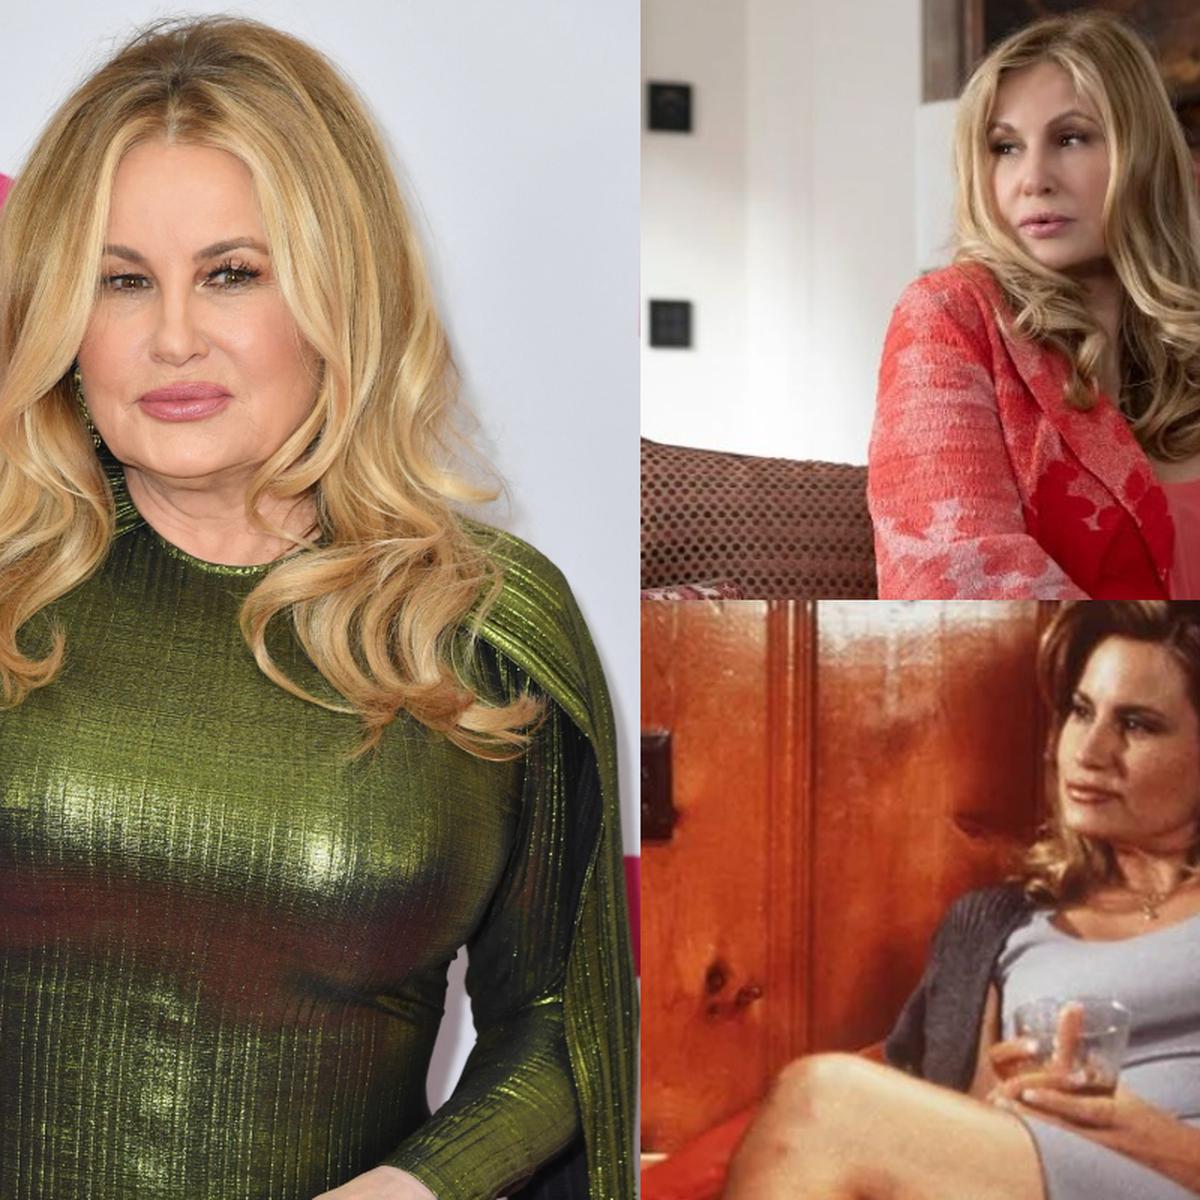 Tanya's Arc In The White Lotus Season 2 Was Inspired By Jennifer Coolidge's  Personal Quirks